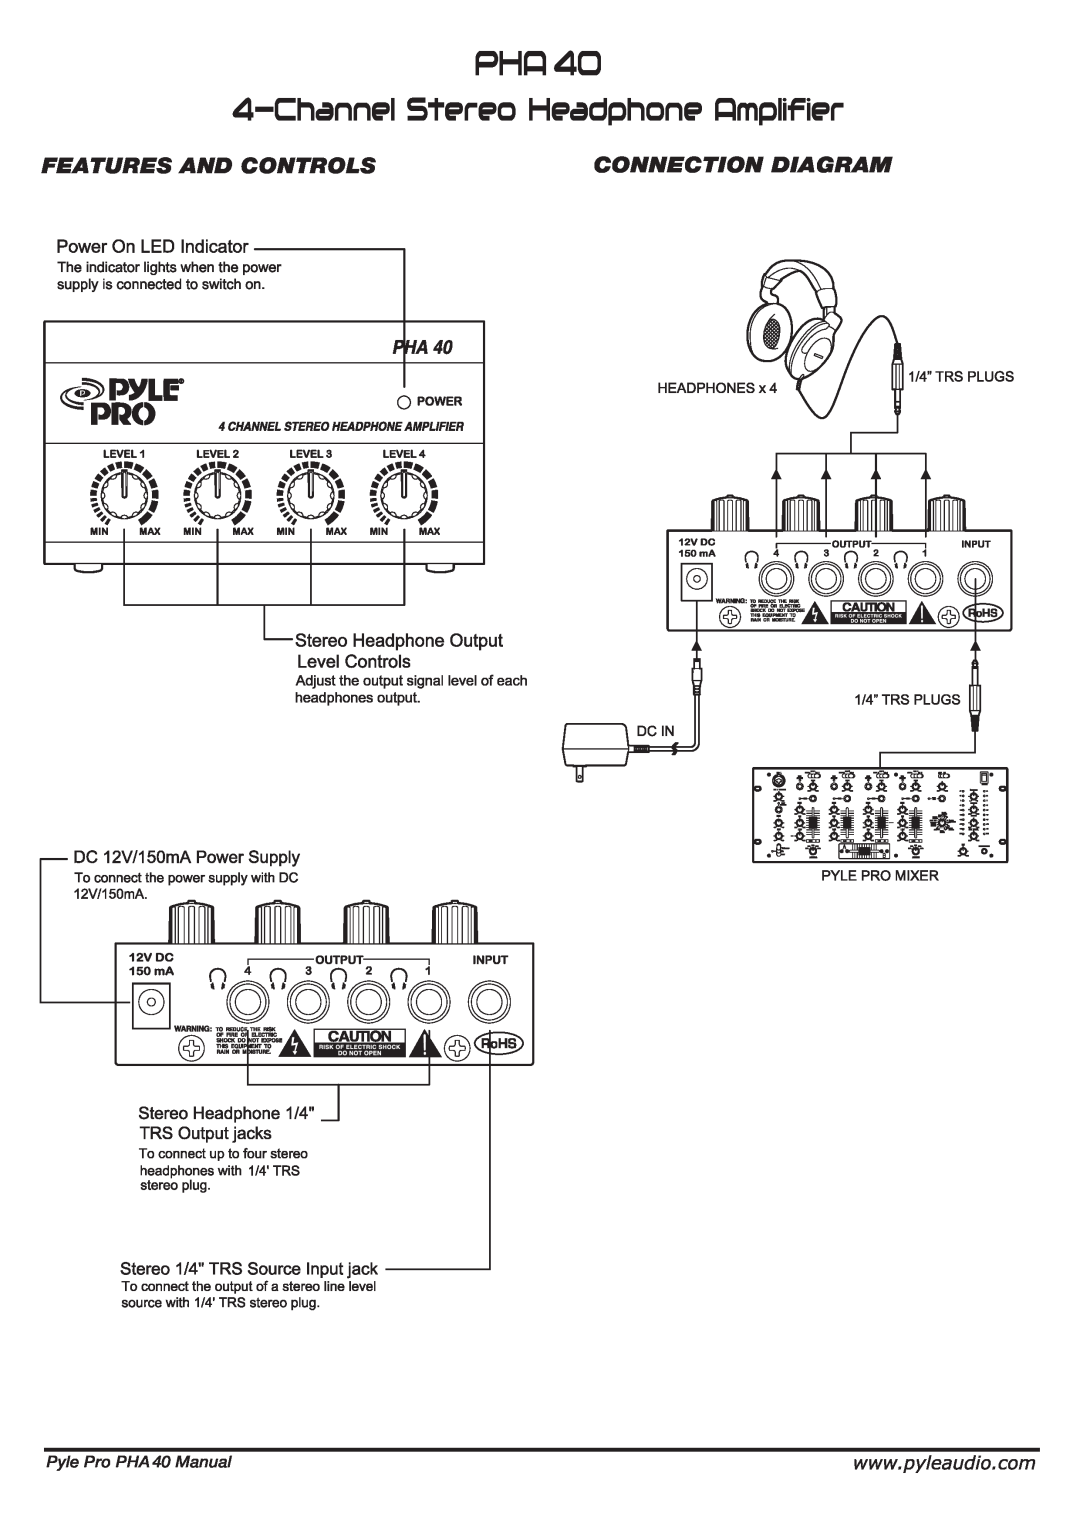 PYLE Audio Features And Controls, Connection Diagram, ChannelStereo Headphone Amplifier, Pyle Pro PHA 40 Manual 